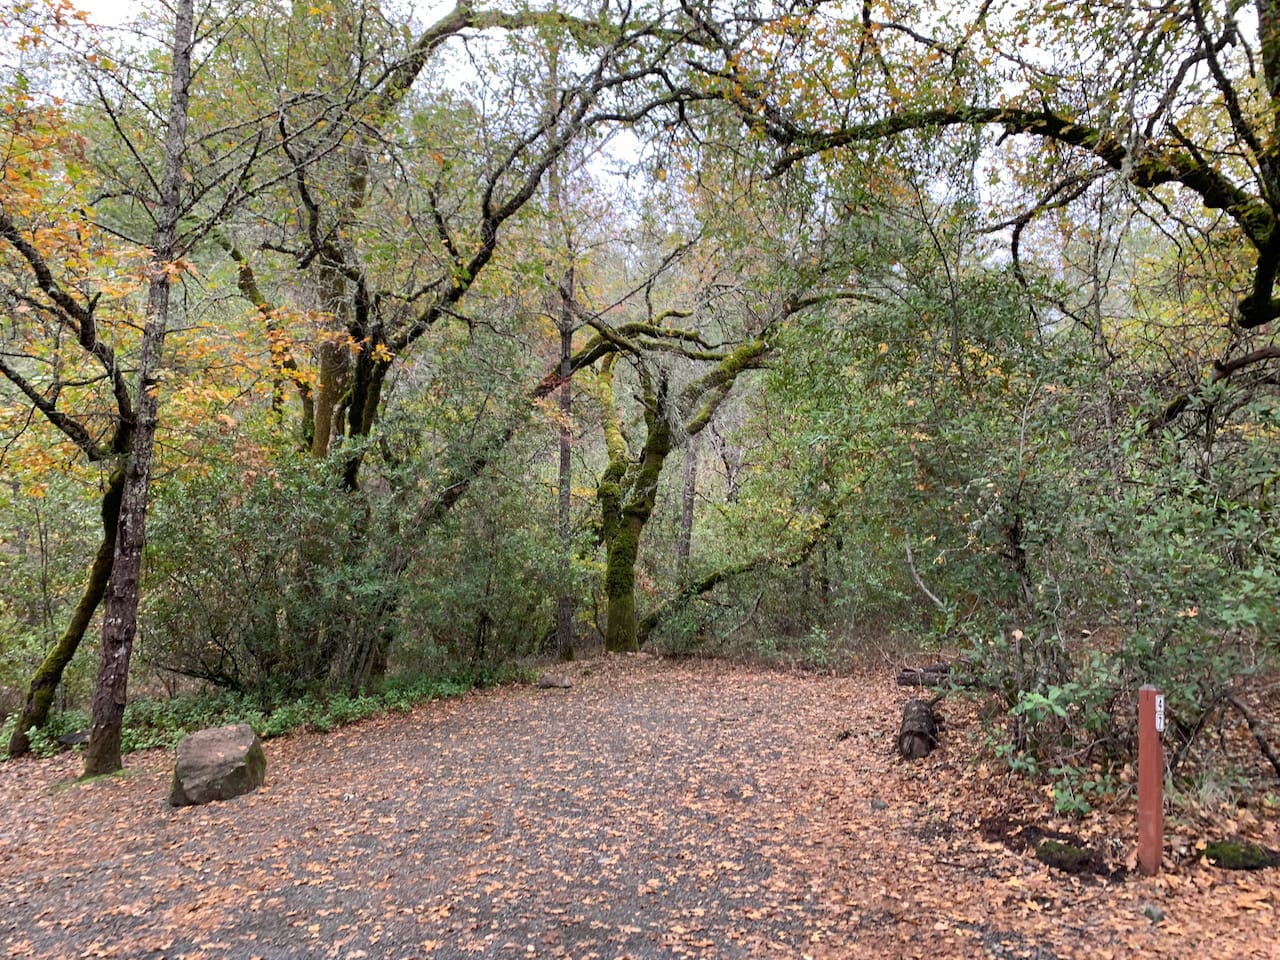 Bothe-Napa Valley State Park 1